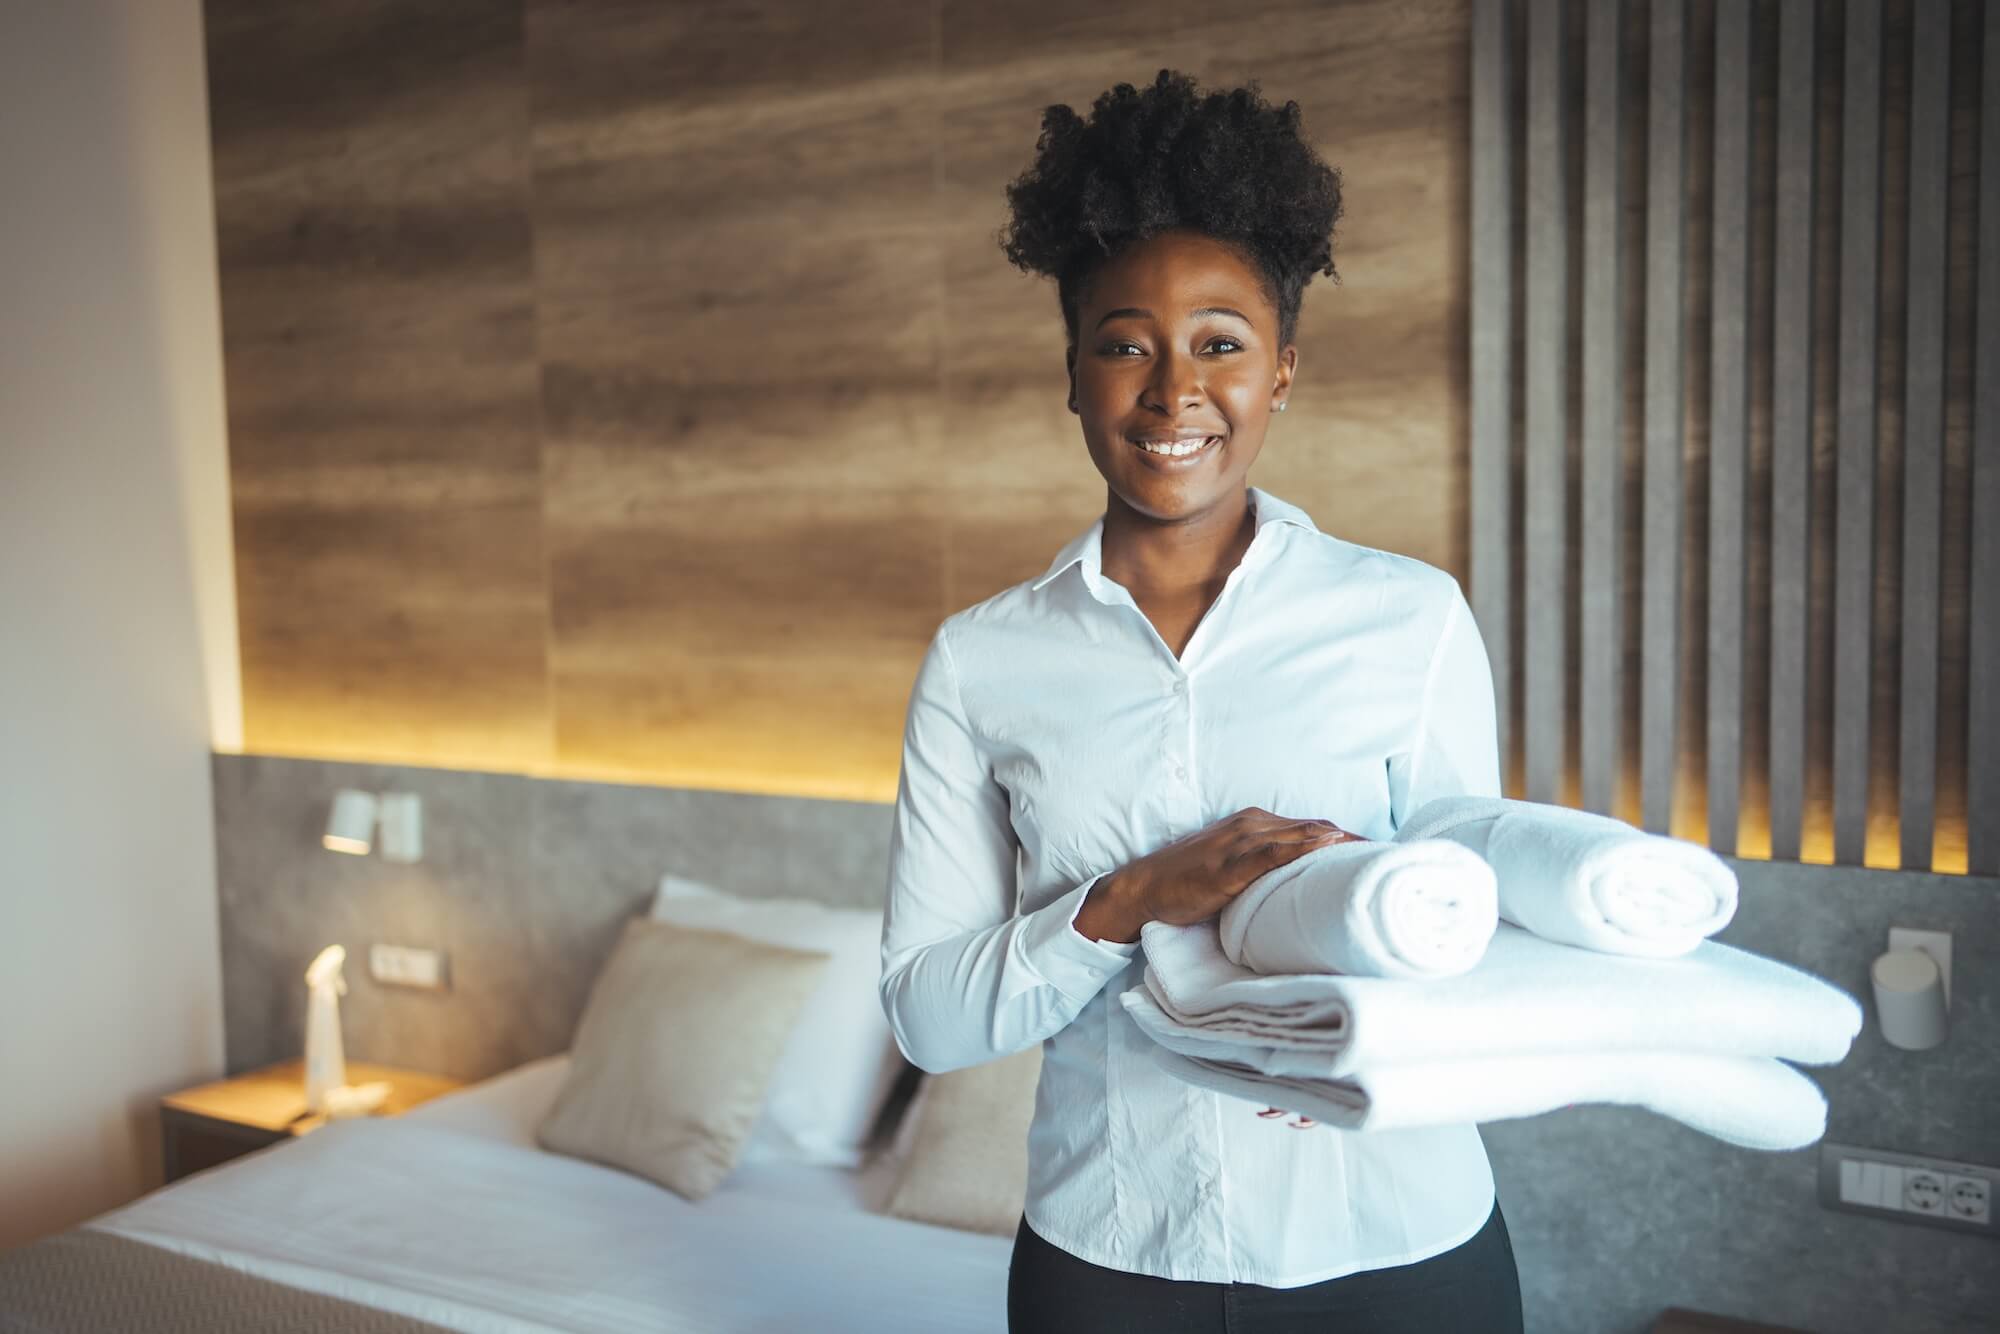 Roswell GA Housekeeping services, hire a housekeeper in Roswell GA